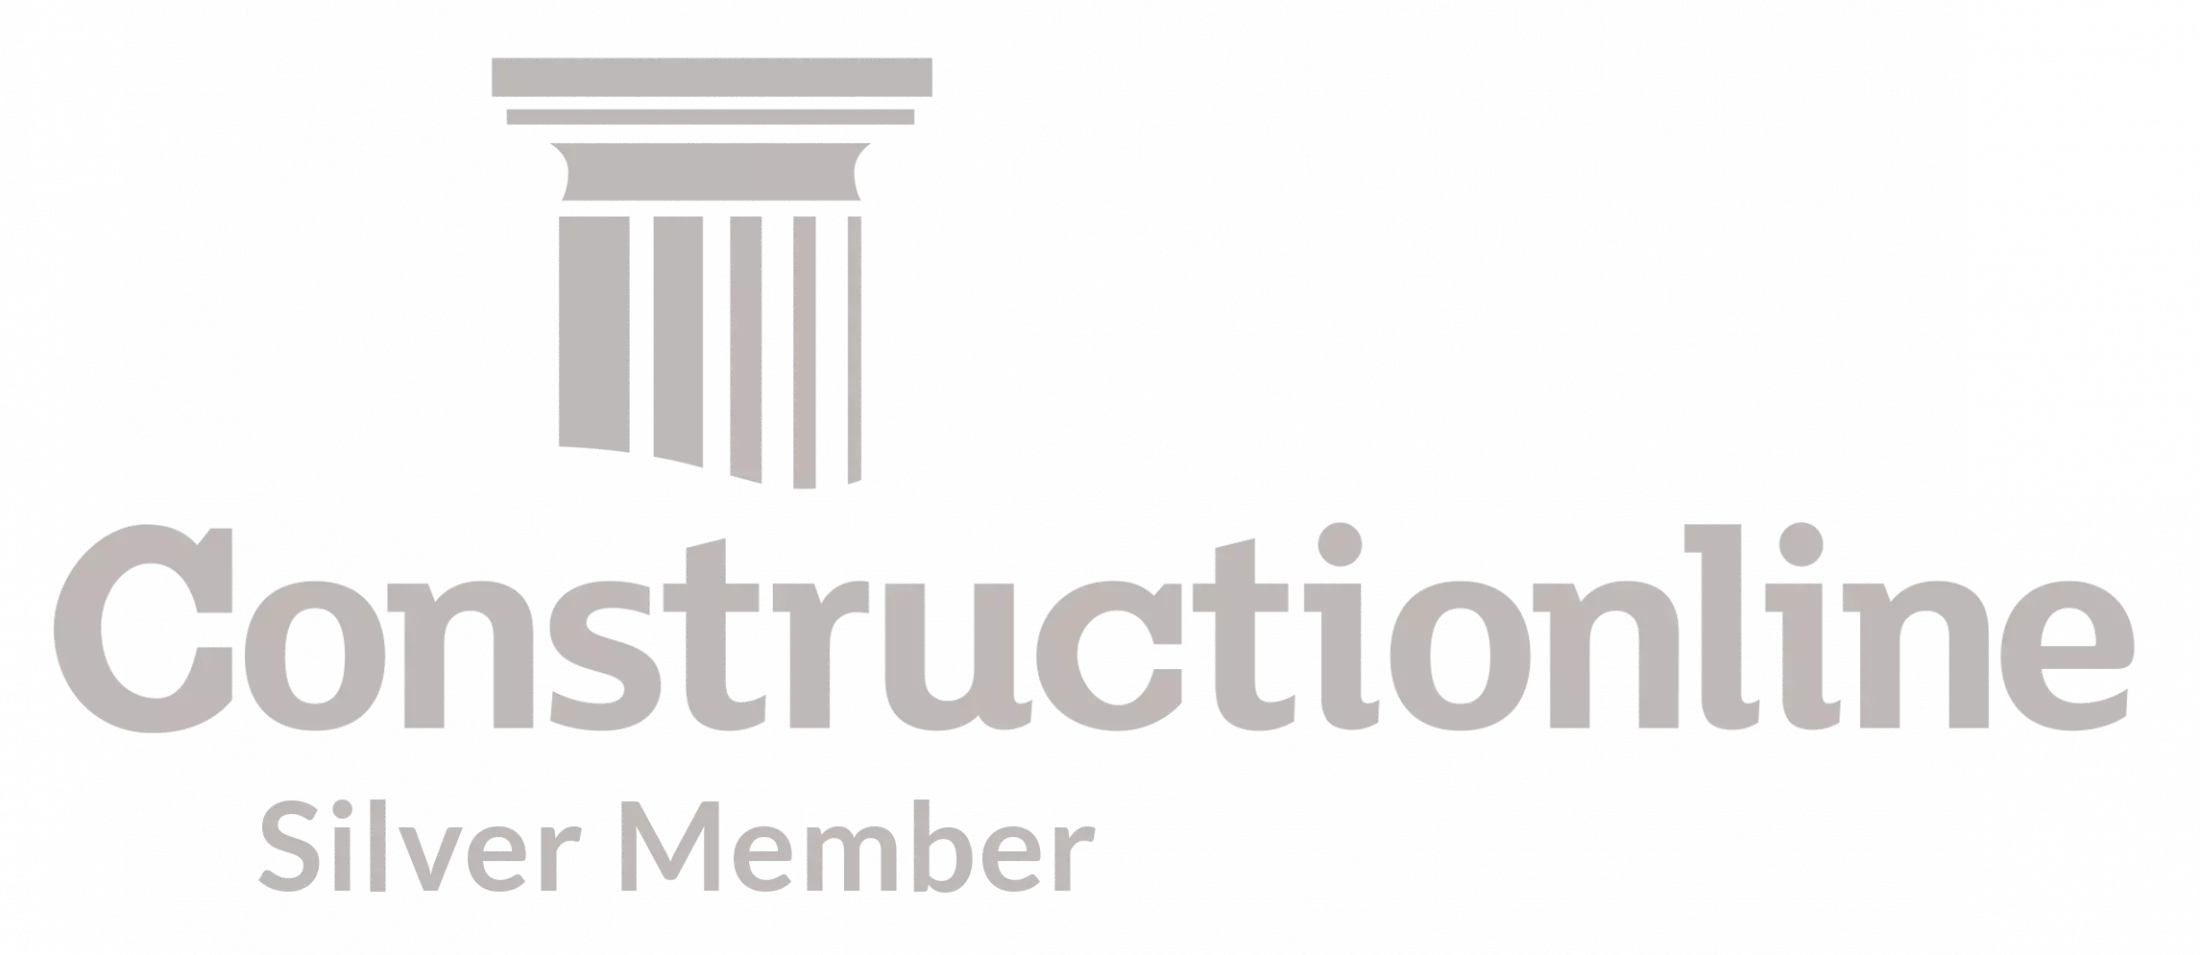 Constructionline Silver Member accreditation